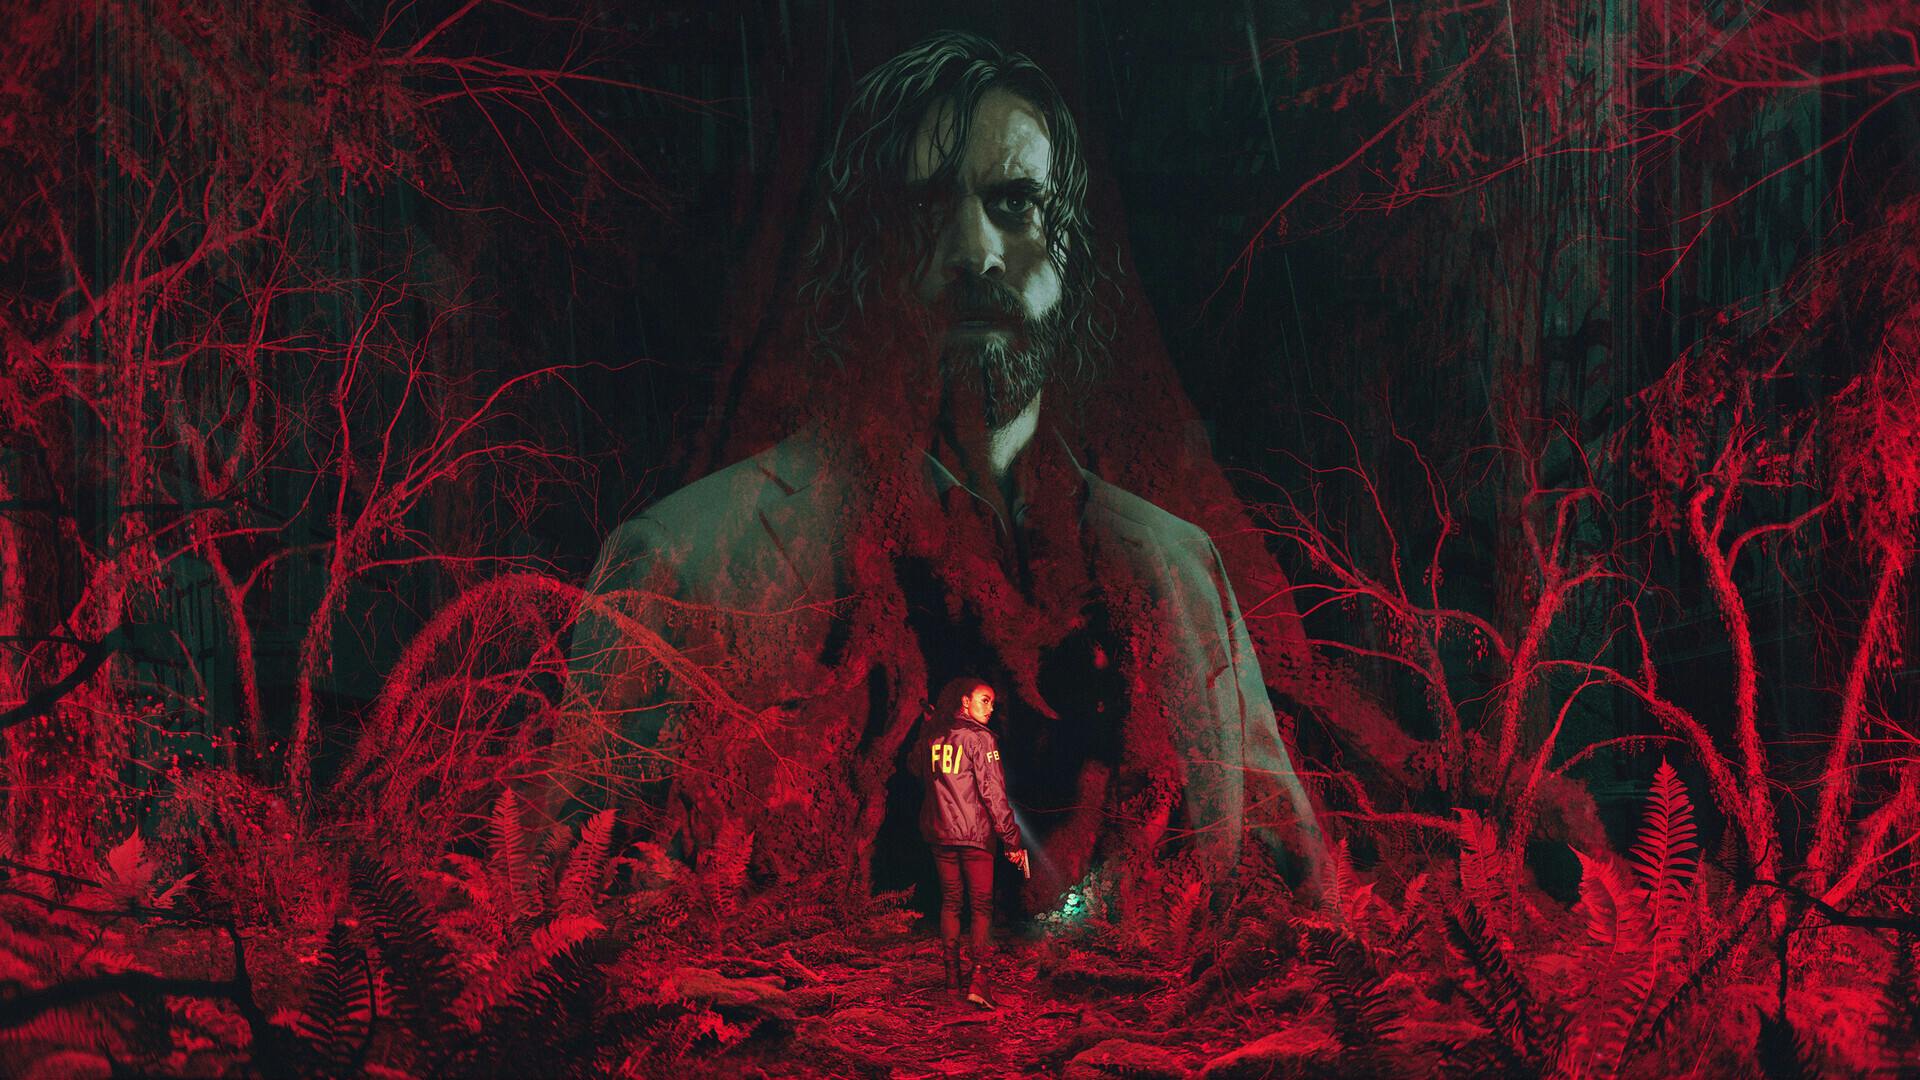 Alan Wake 2 key art featuring Saga walking into a red forest with Alan in the background as a giant floating torso.